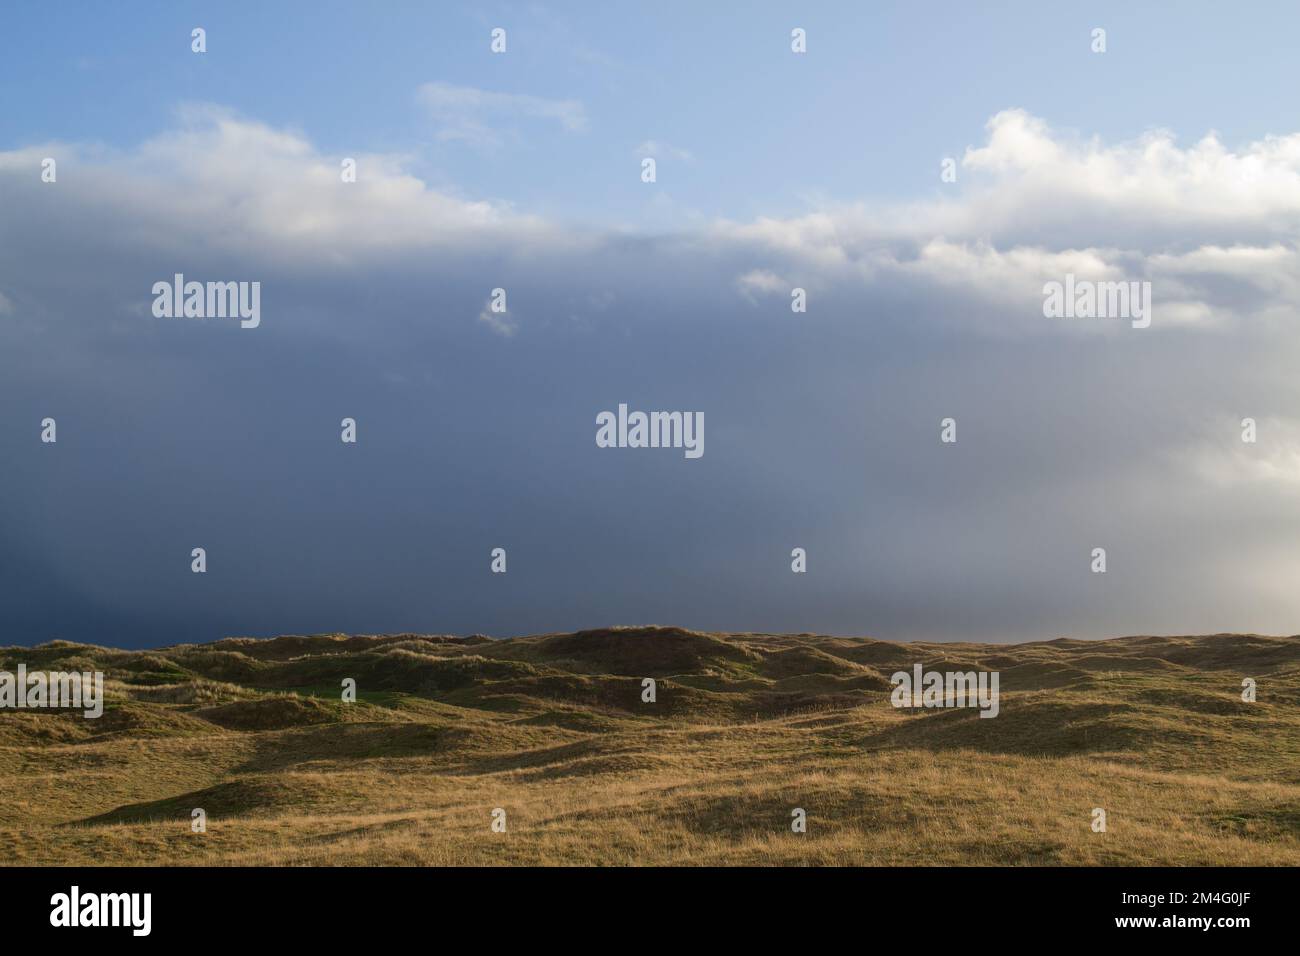 Dunes completely overgrown by grass due to nitrogen deposition, low horizon, dark clouds Stock Photo